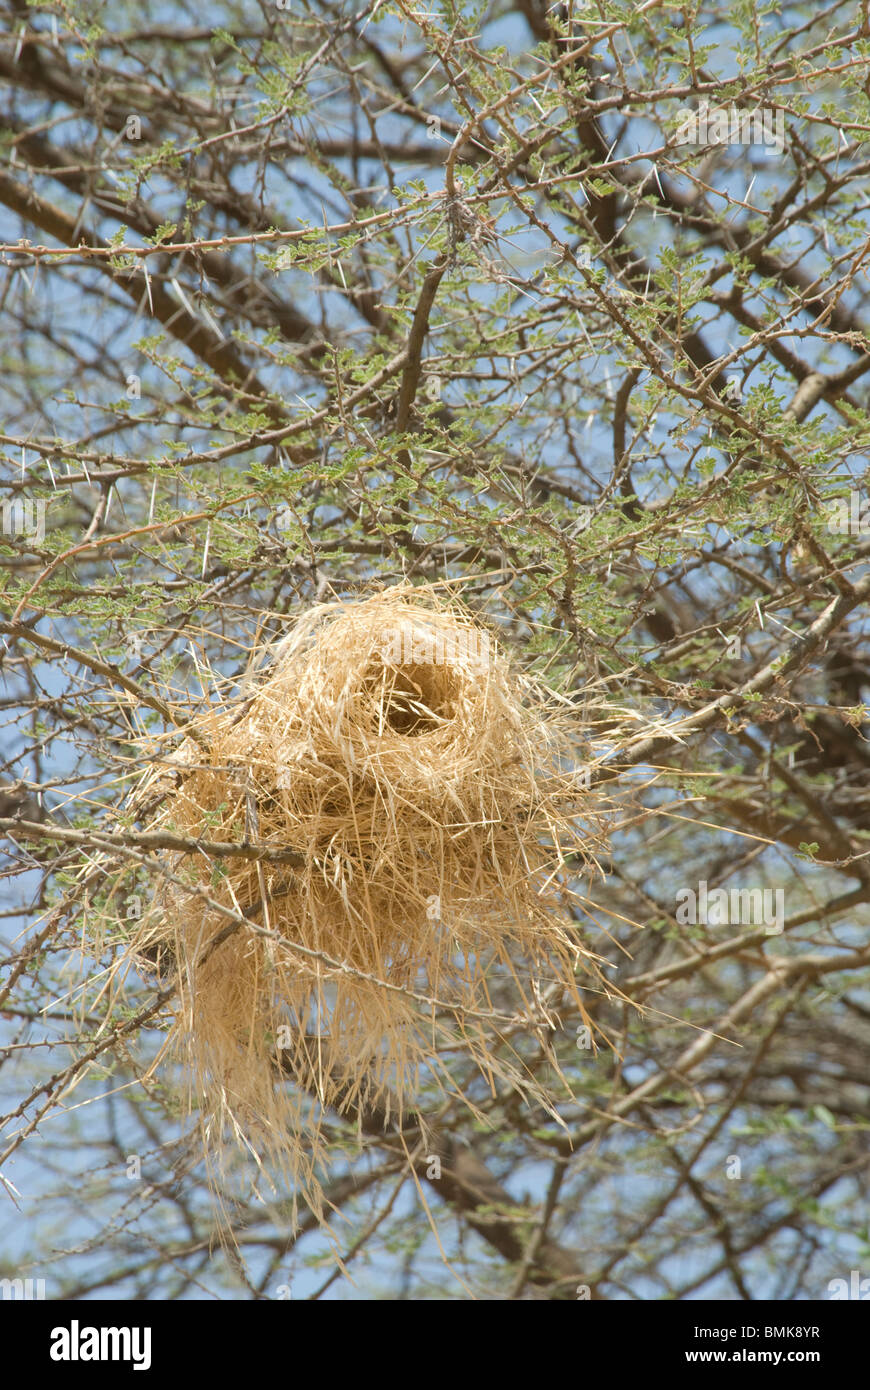 Ethiopia: Lower Omo River Basin, road from Omorate to Duss, weaver bird's nest Stock Photo